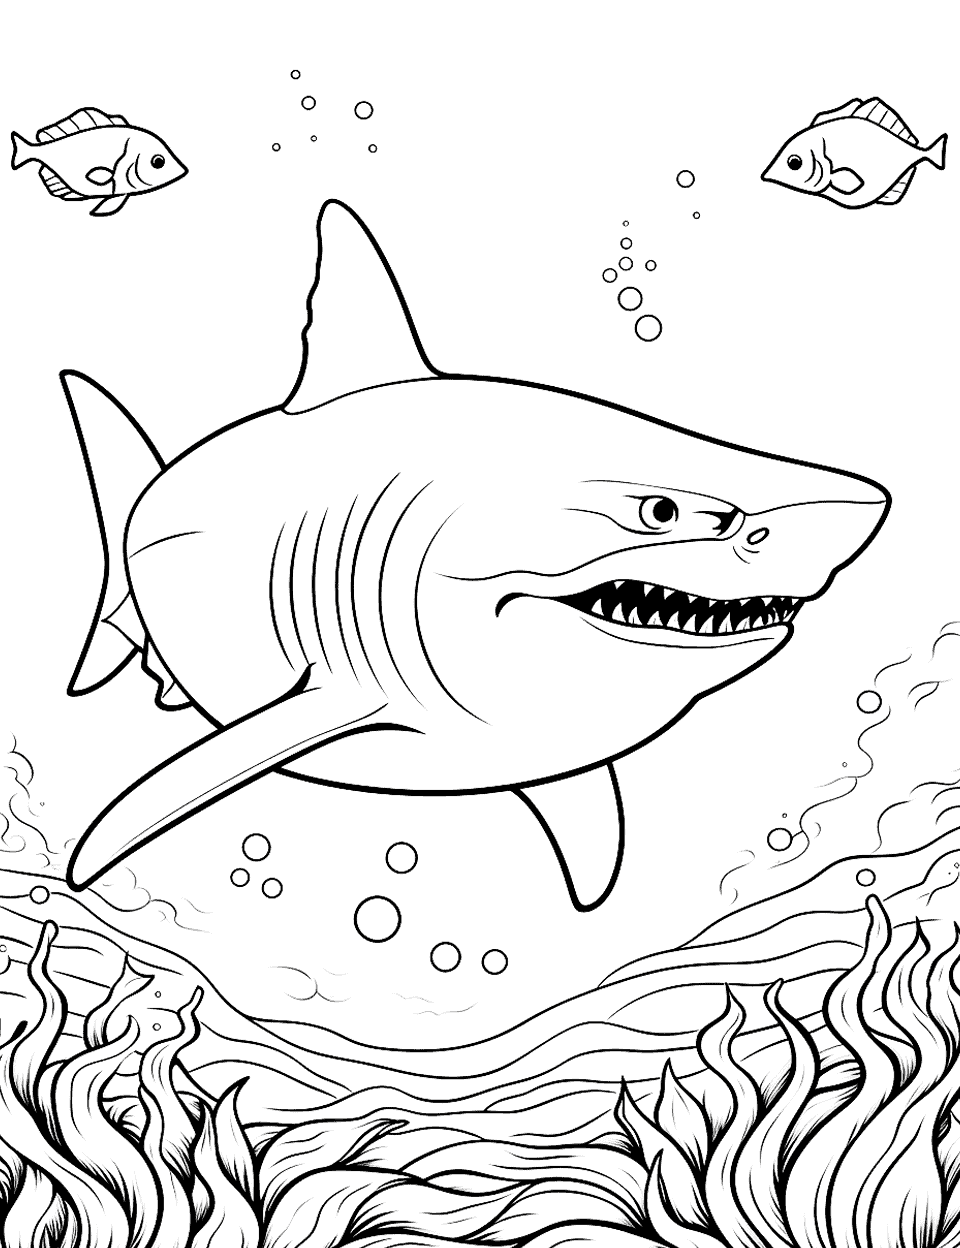 Tiger Shark Territory Coloring Page - A territorial tiger shark warding off intruders.